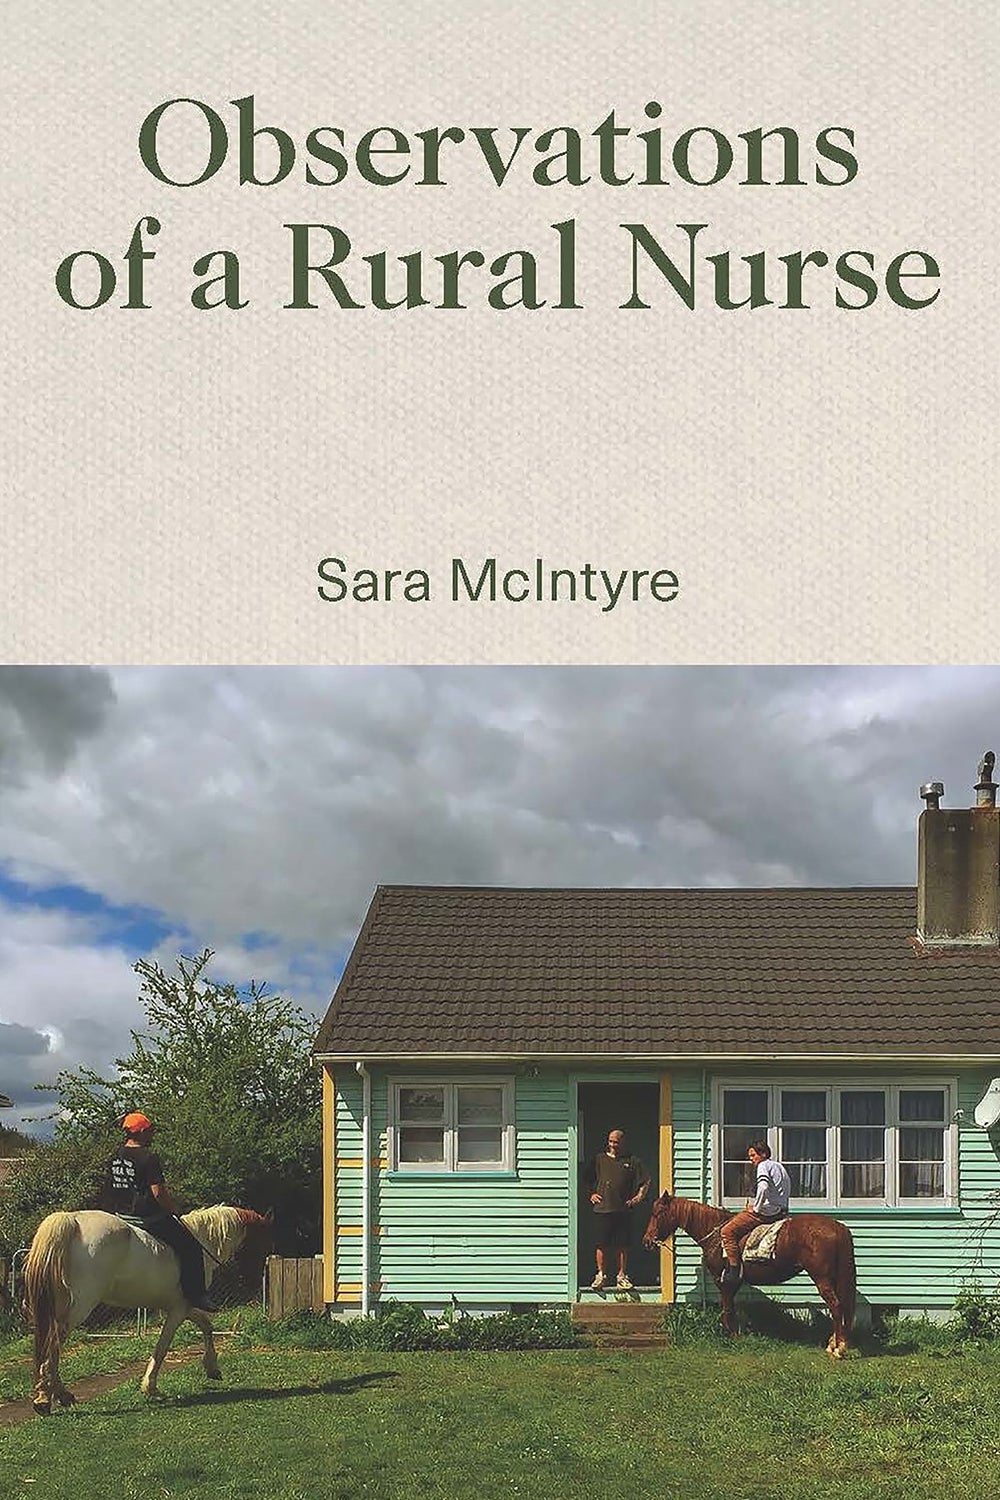 Observations of a Rural Nurse by Sara Mclntyre